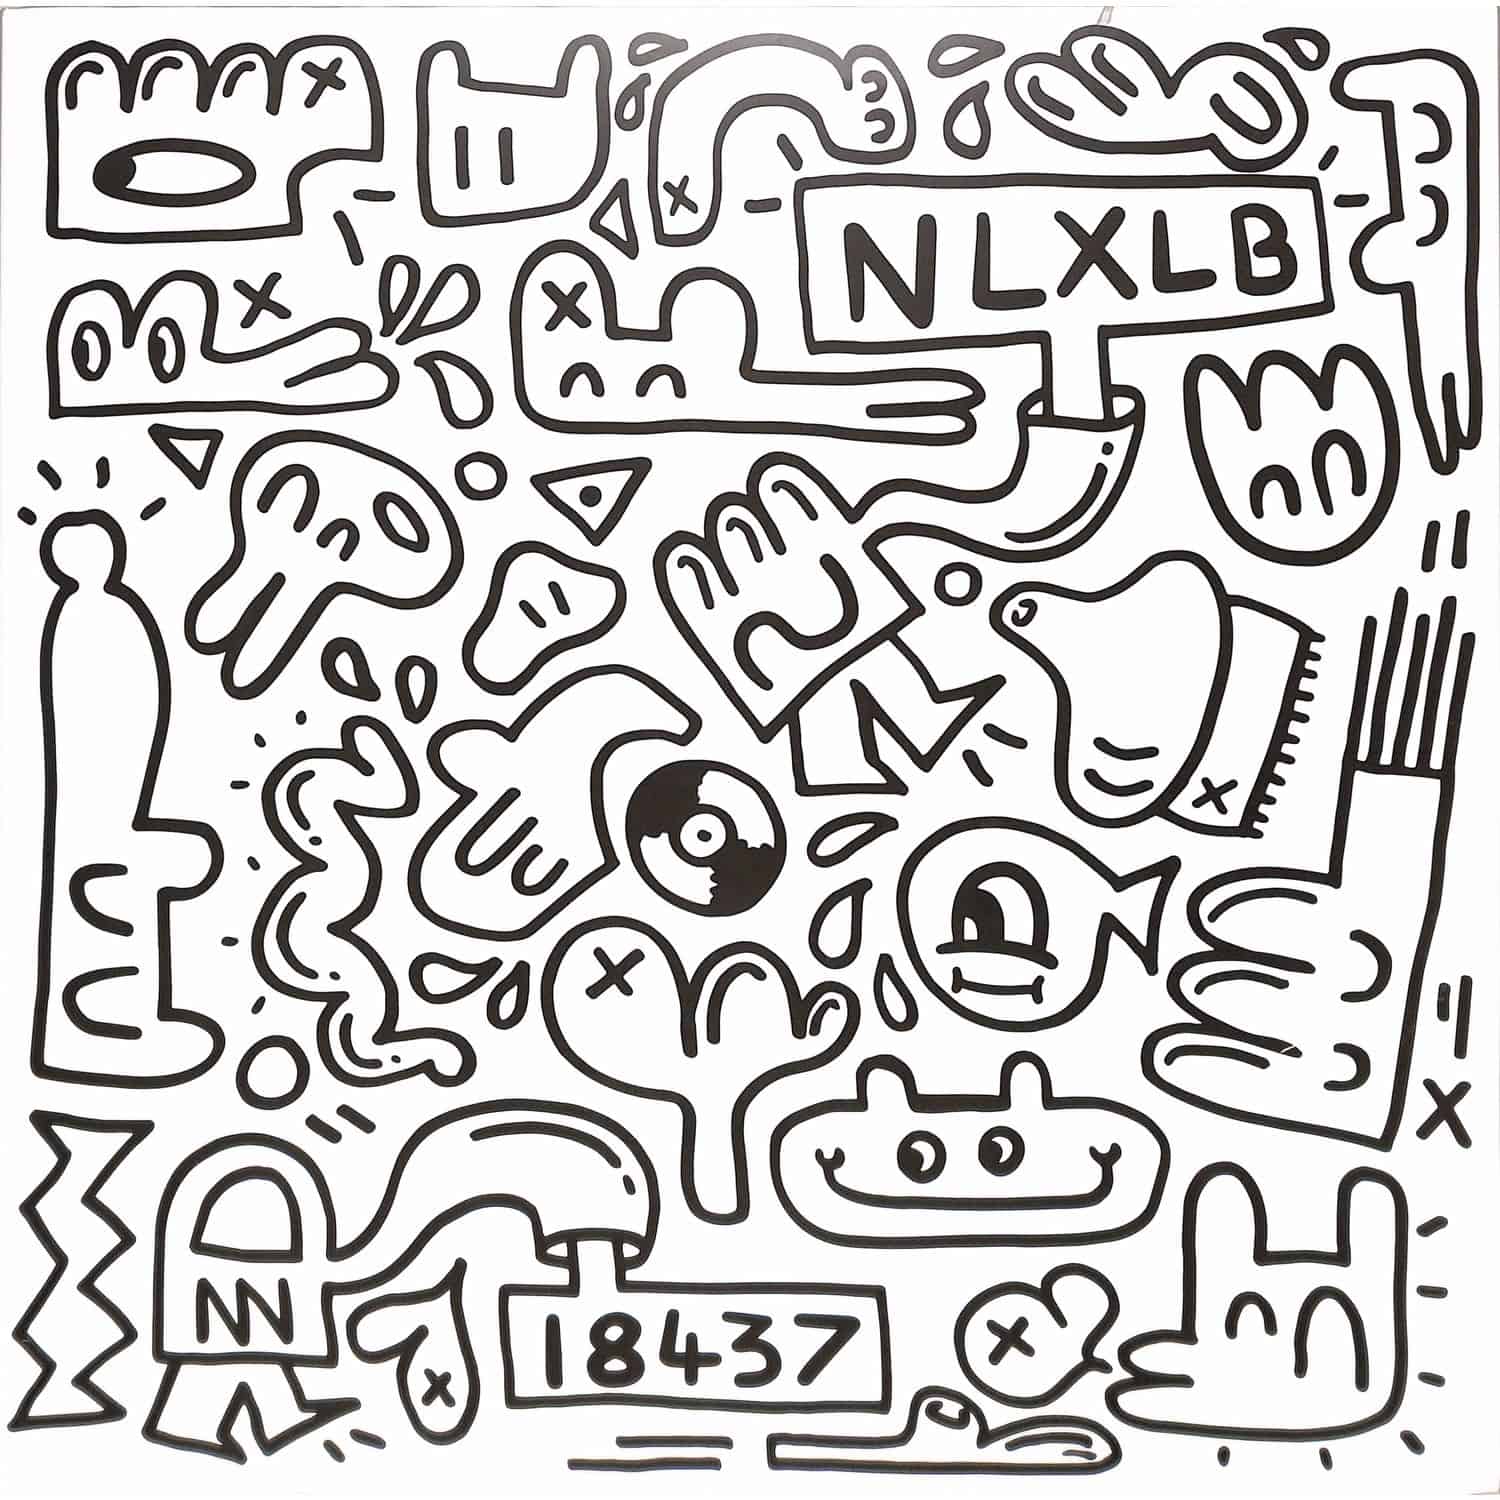 NLXLB - DIRTY VISION EP